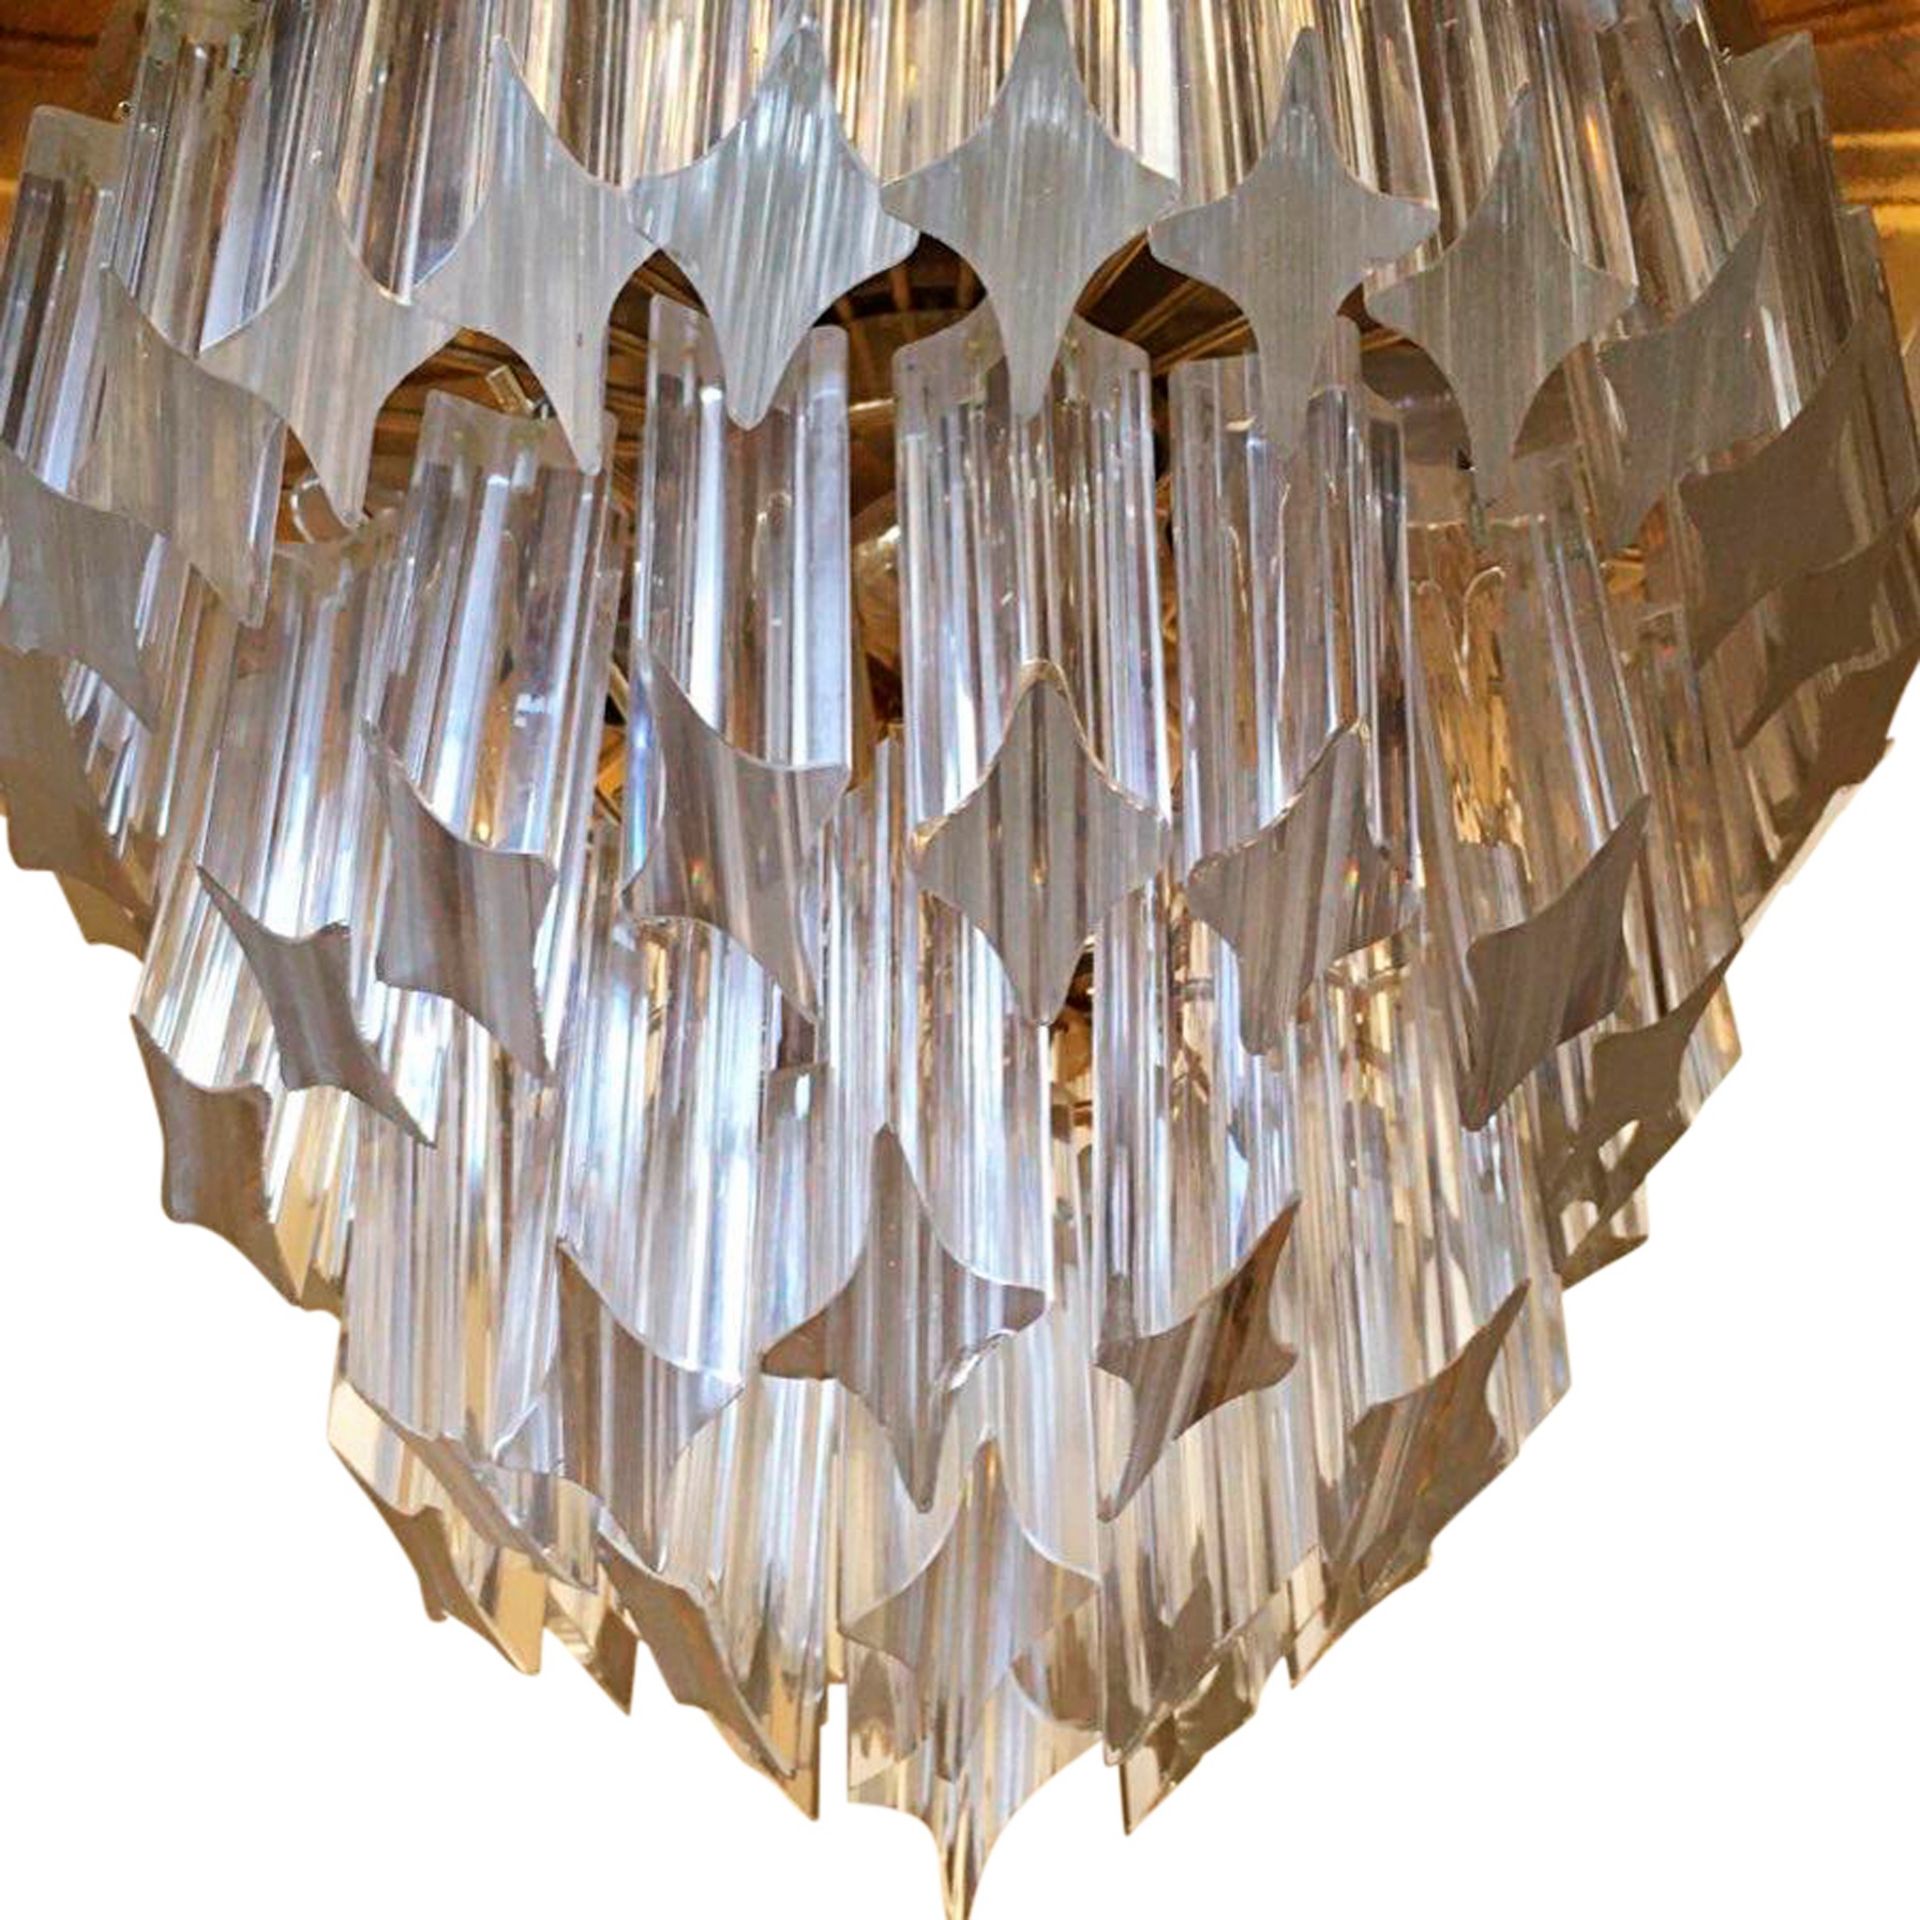 ATTRIBUTED TO VENINI, MURANO PAIR OF 'ASTRA QUADRILOBO' CRYSTAL CHANDELIERS, CIRCA 1960 - Image 4 of 4